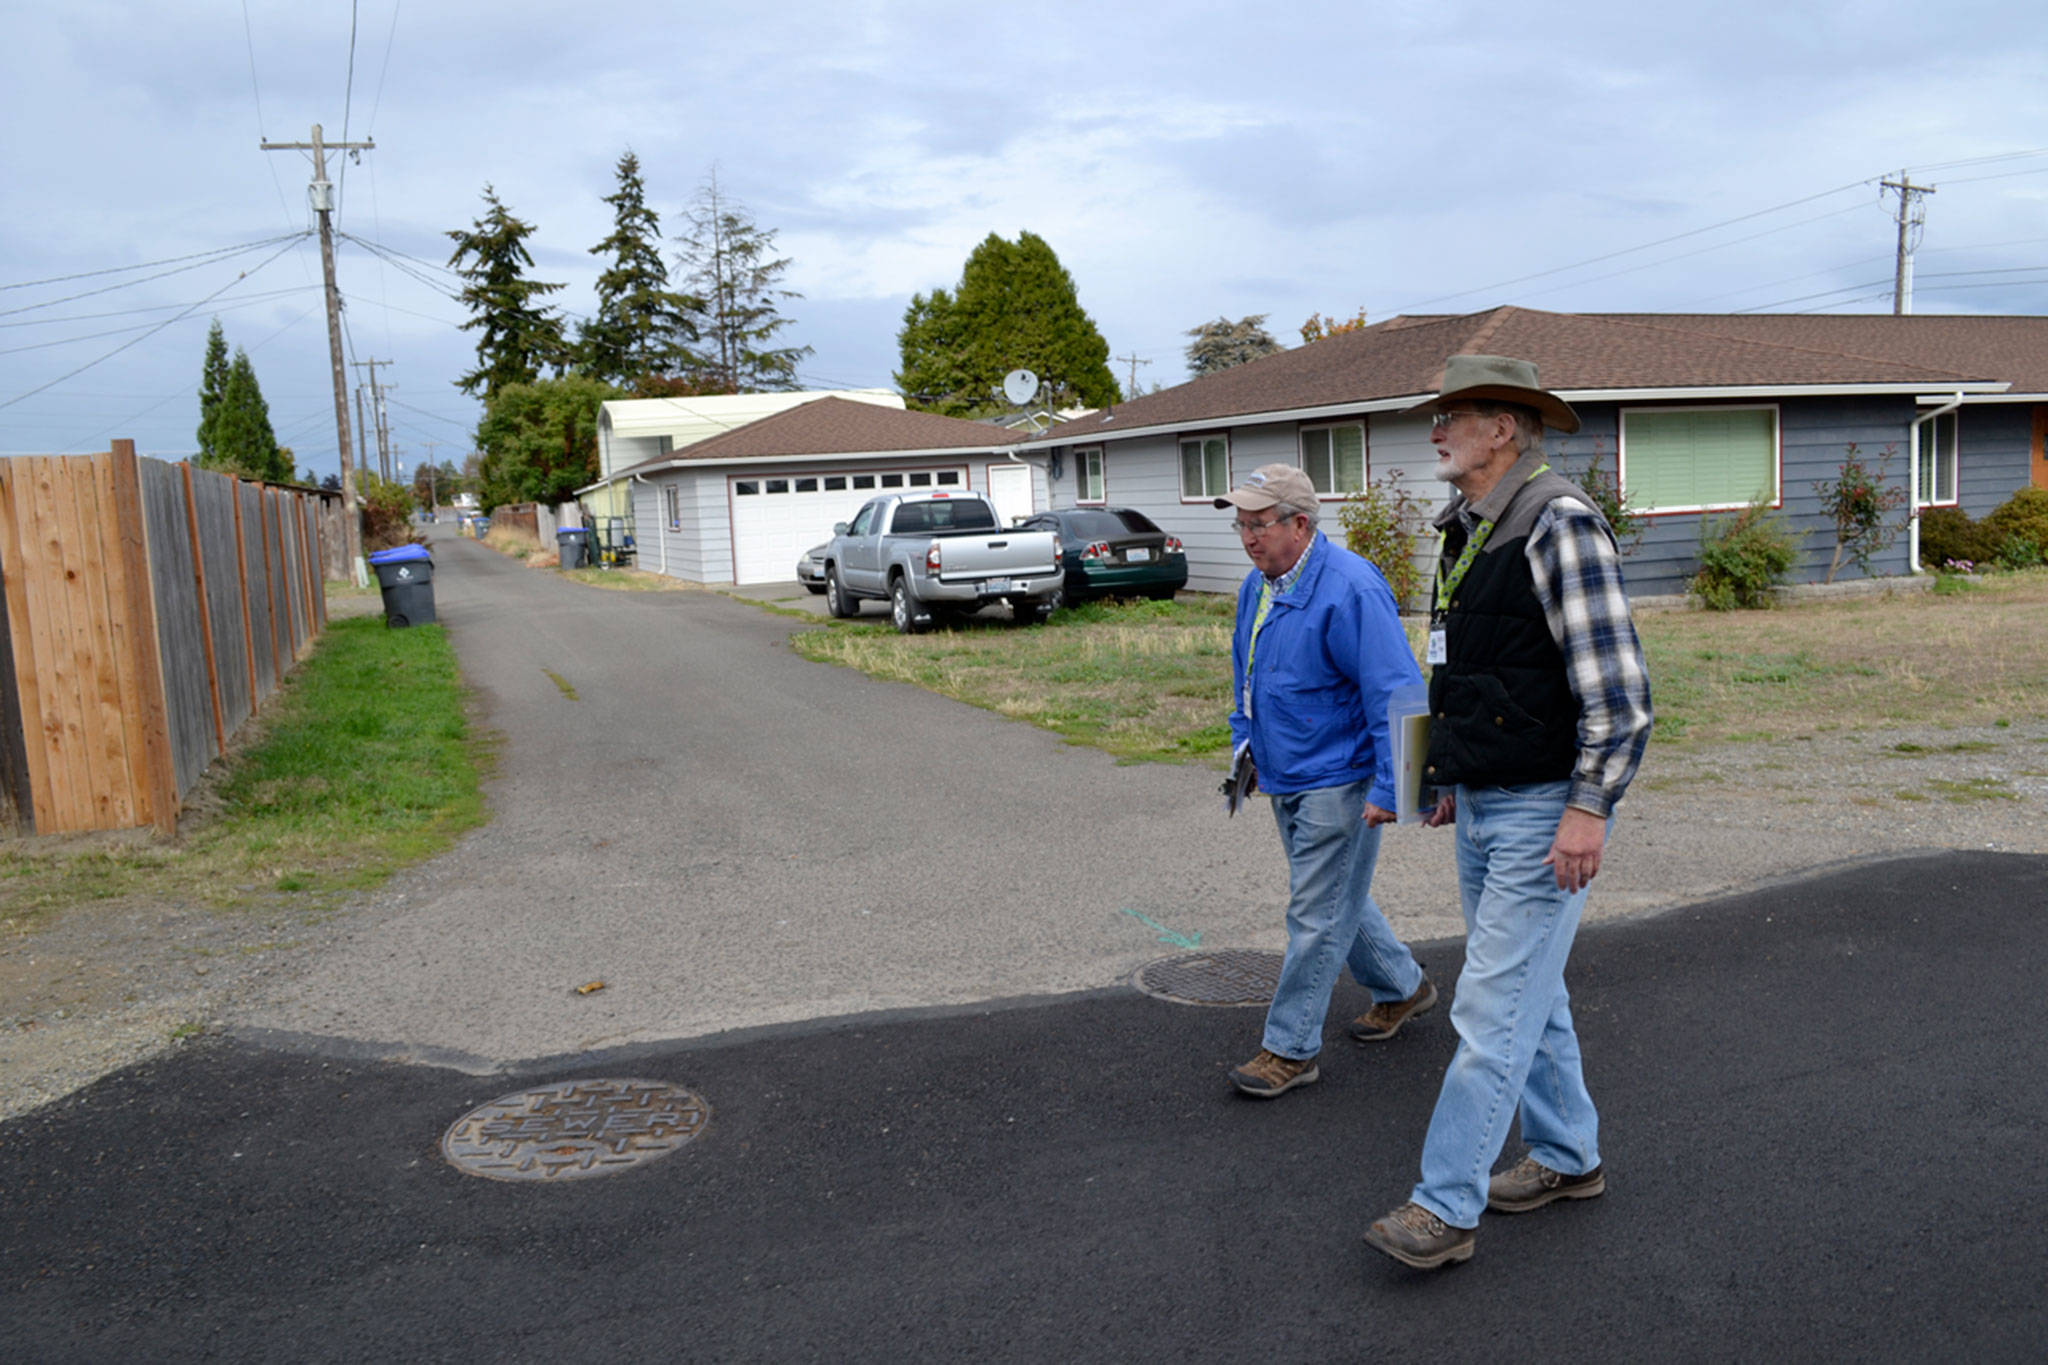 Matthew Nash/Olympic Peninsula News Group                                In September 2015, Ernie Karger, a Habitat for Humanity volunteer, and Bryce Fish with Sequim Sunrise Rotary assess homes near Fir Street as part of the Habitat for Humanity of Clallam County’s Neighborhood Revitalization project.